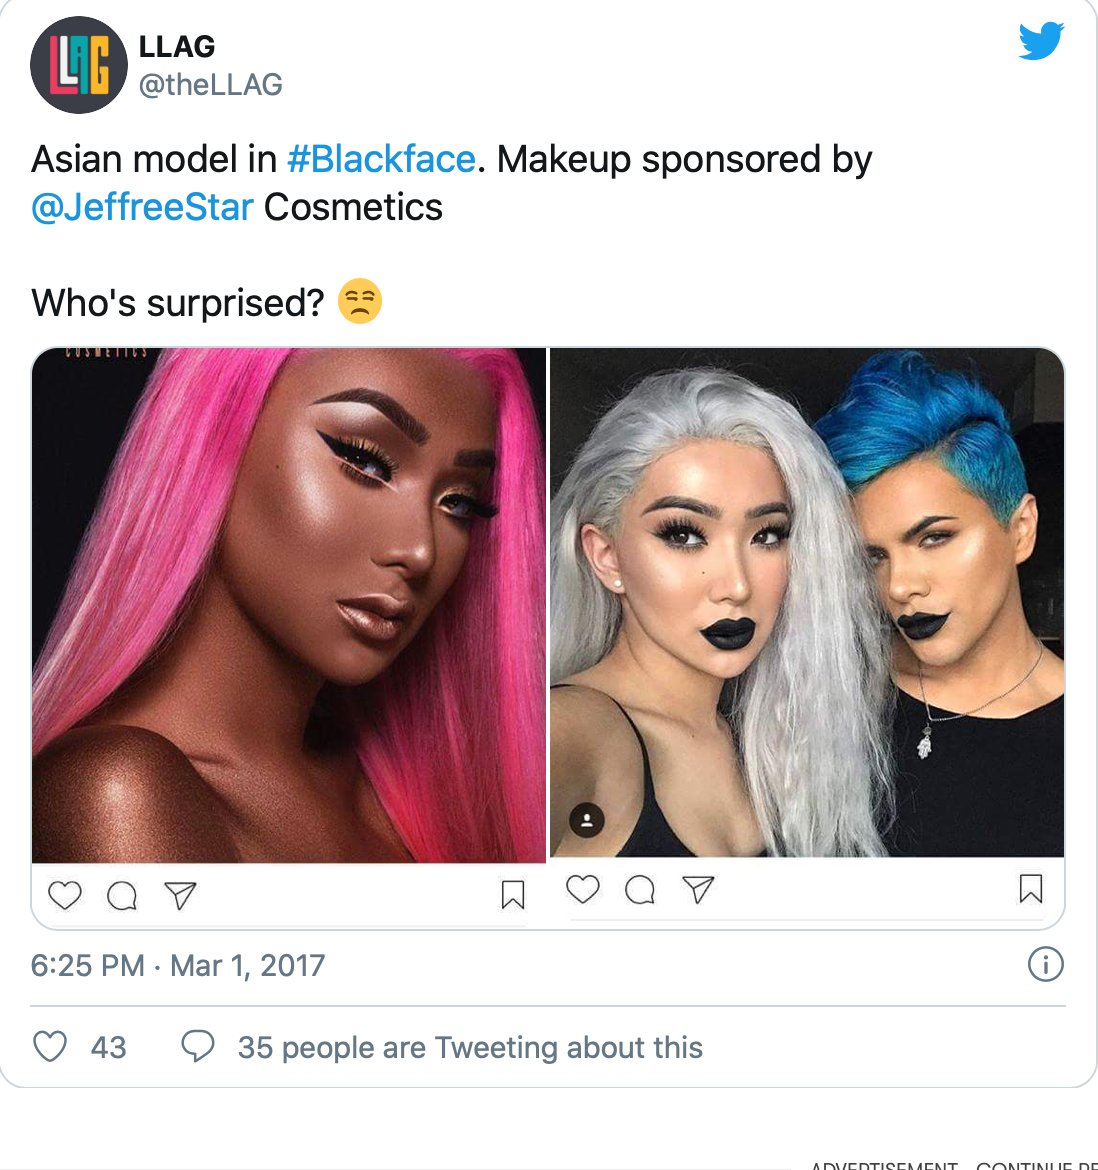 Lyrics from Jeffree's 2007 song "We Want Cunt" feature the n-word, among other problematic and insensitive lyrics.Also in 2017, Jeffree's Androgyny palette campaign drew criticism. The photos of Nikita Dragun show her skin was clearly darkened for the sake of the advertisement.